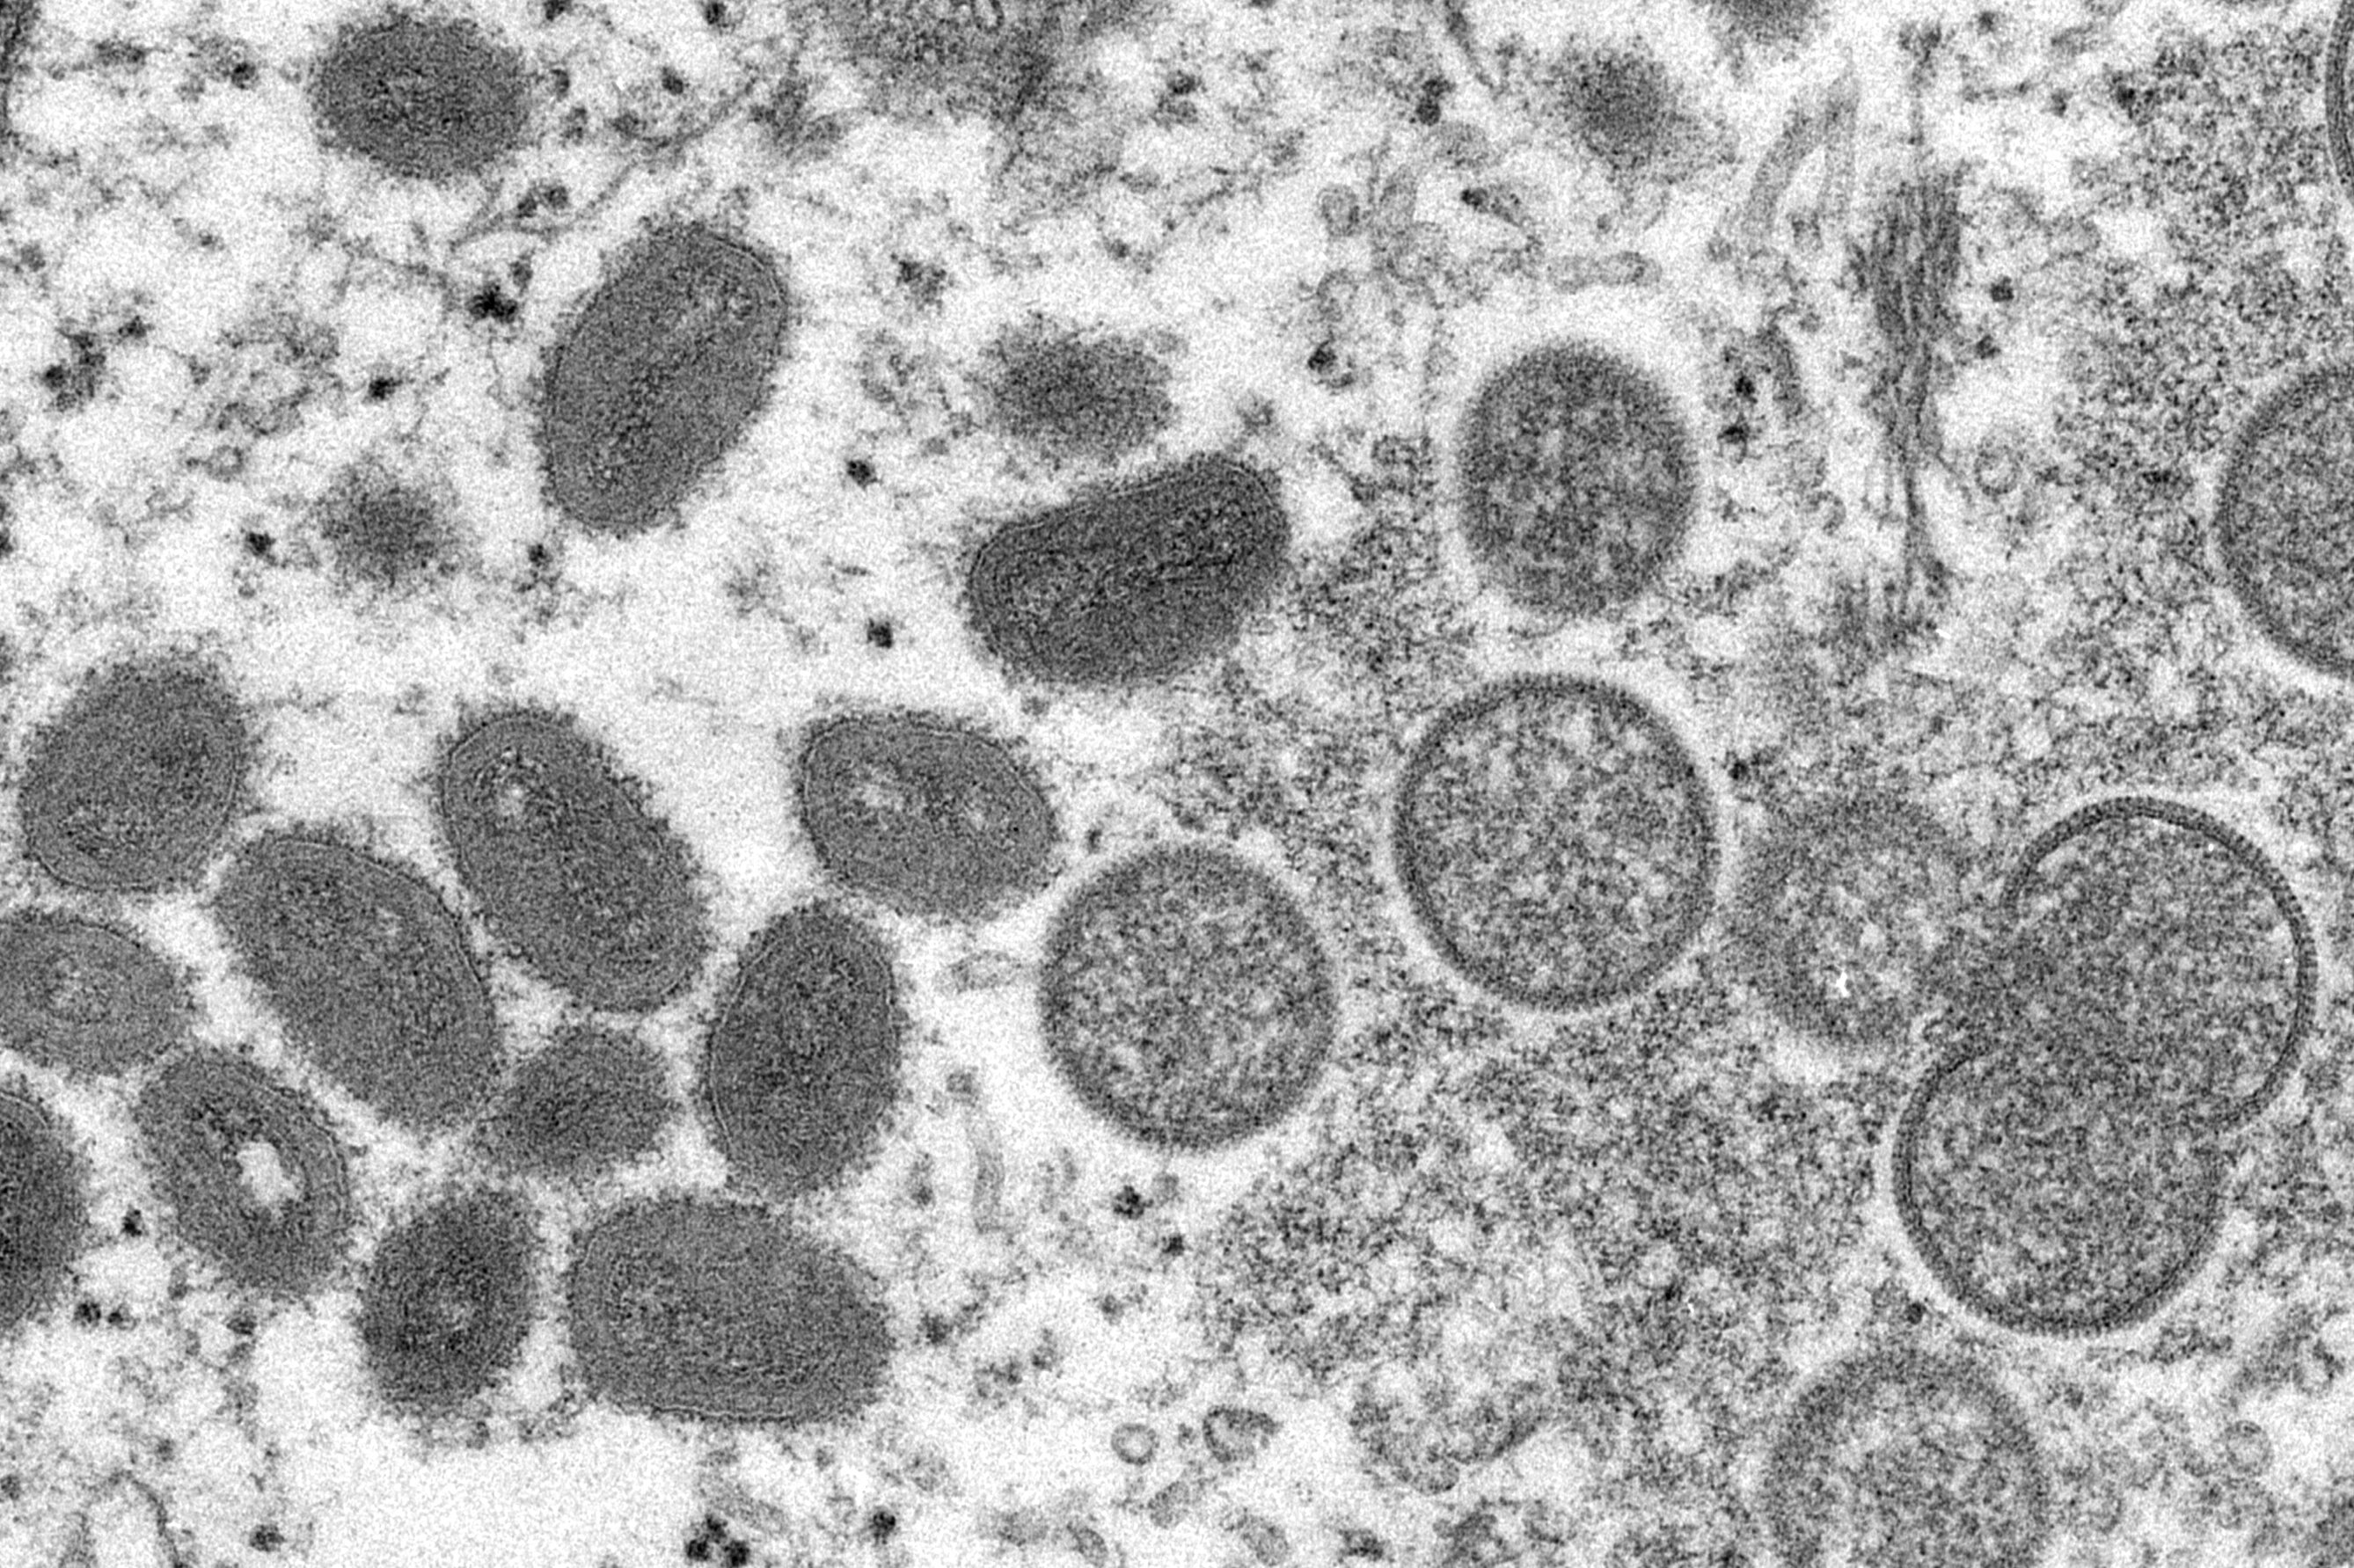 #2 monkeypox strains in US suggest possible undetected spread